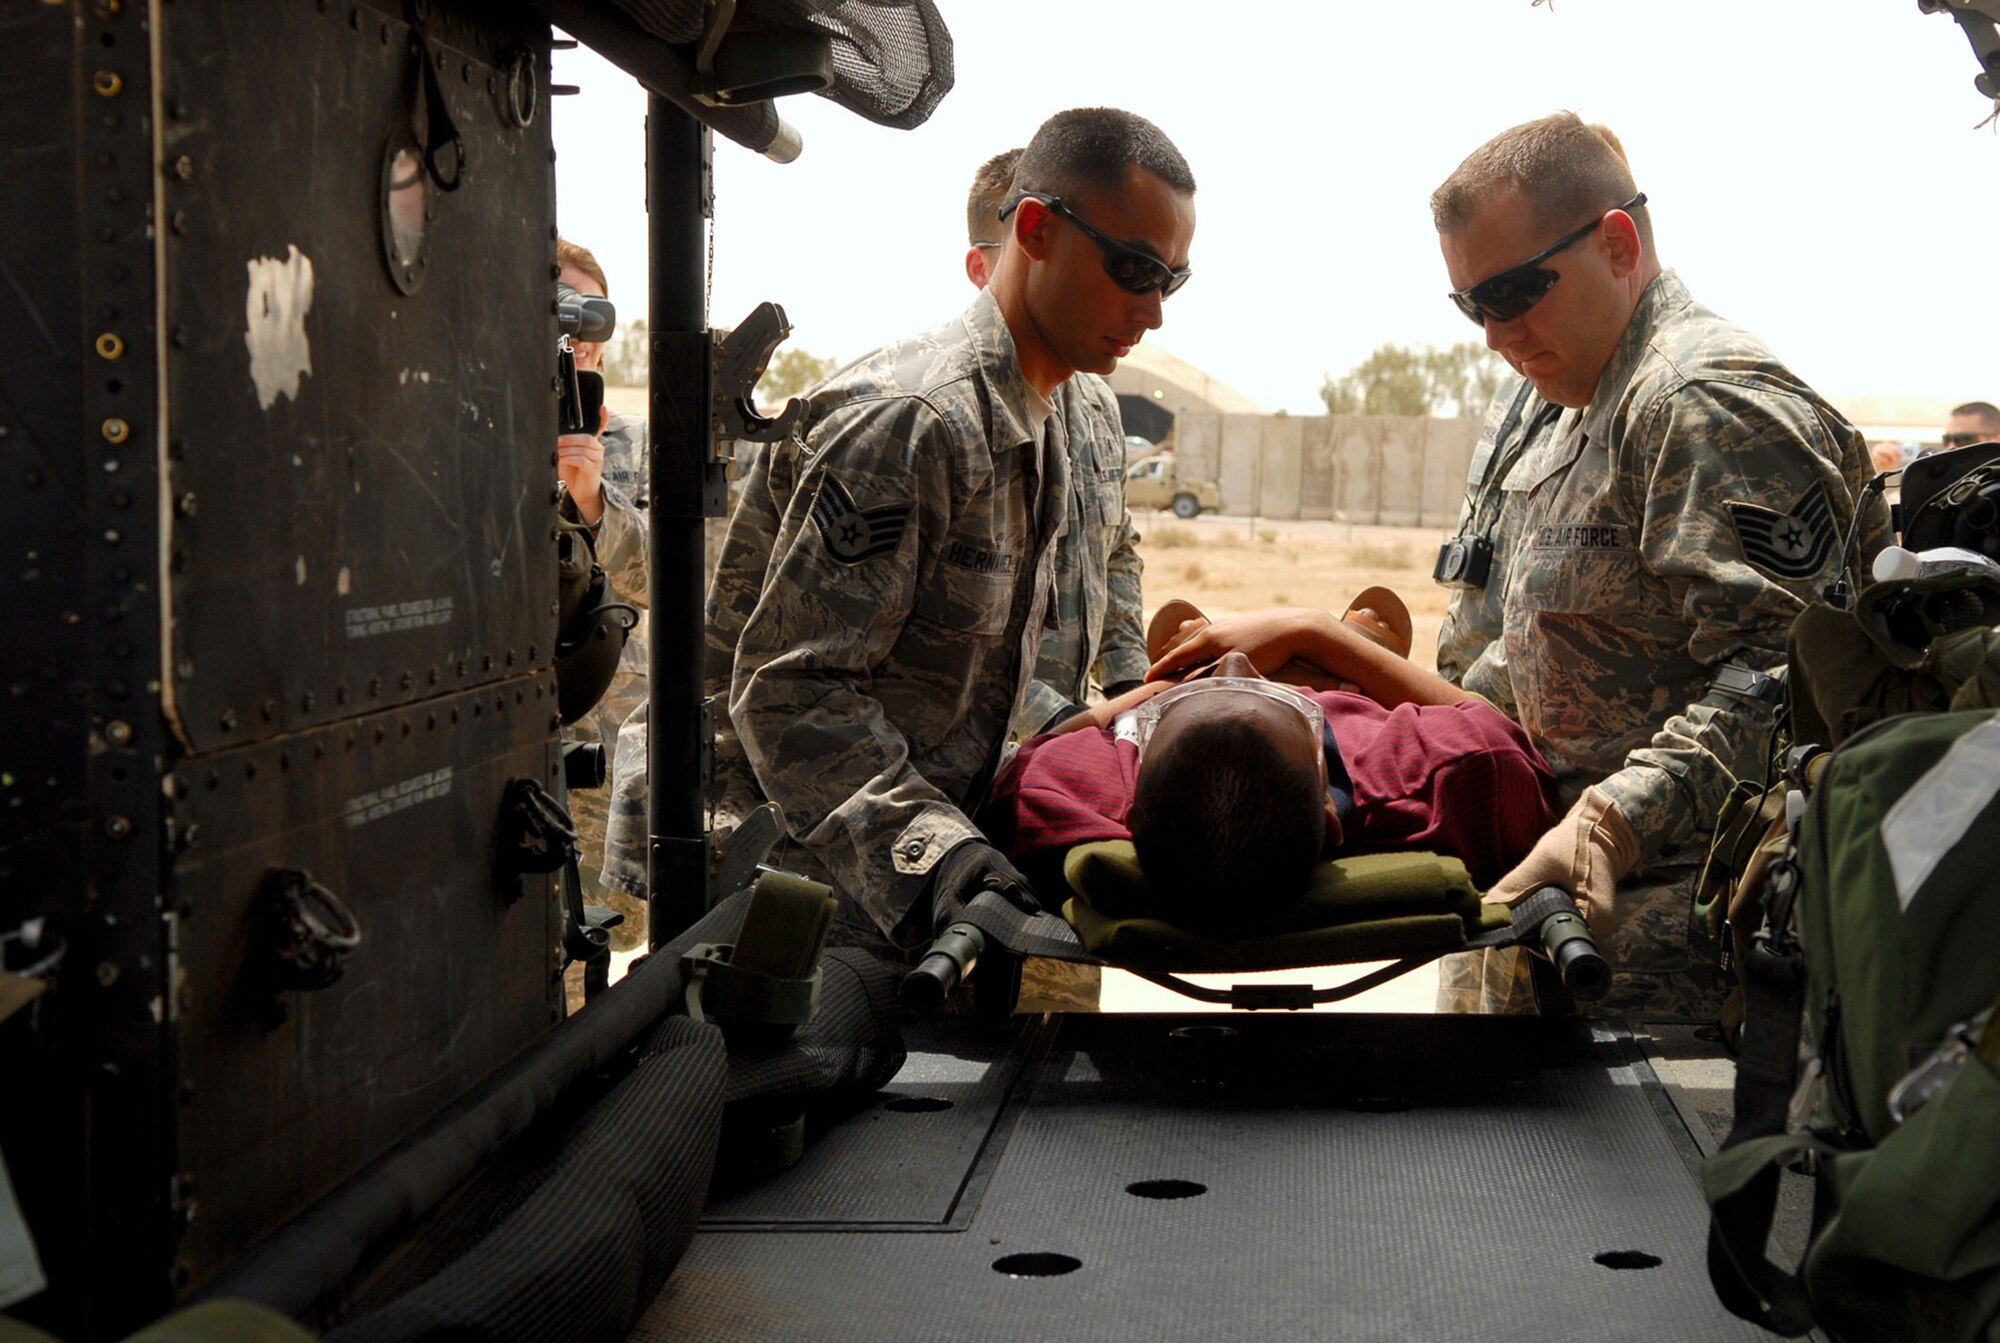 Staff Sgt. David Hernandez and Tech. Sgt. Joseph Vergona load an Iraqi trauma patient onto an Iraqi air force Huey II May 14 at Balad Air Base, Iraq. The patient was then flown by Iraqi air force members from the Air Force Theater Hospital to U.S. Army's 86th Combat Support Hospital in Baghdad. Sergeant Hernandez is deployed from Westover Air Reserve Base, Mass., and Sergeant Vergona is deployed from the Pittsburg International Airport Air Reserve Station, Penn. They are 332nd Expeditionary Aeromedical Squadron contingency aeromedical staging facility medical technicians. (U.S. Air Force photo/Senior Airman Julianne Showalter) 
